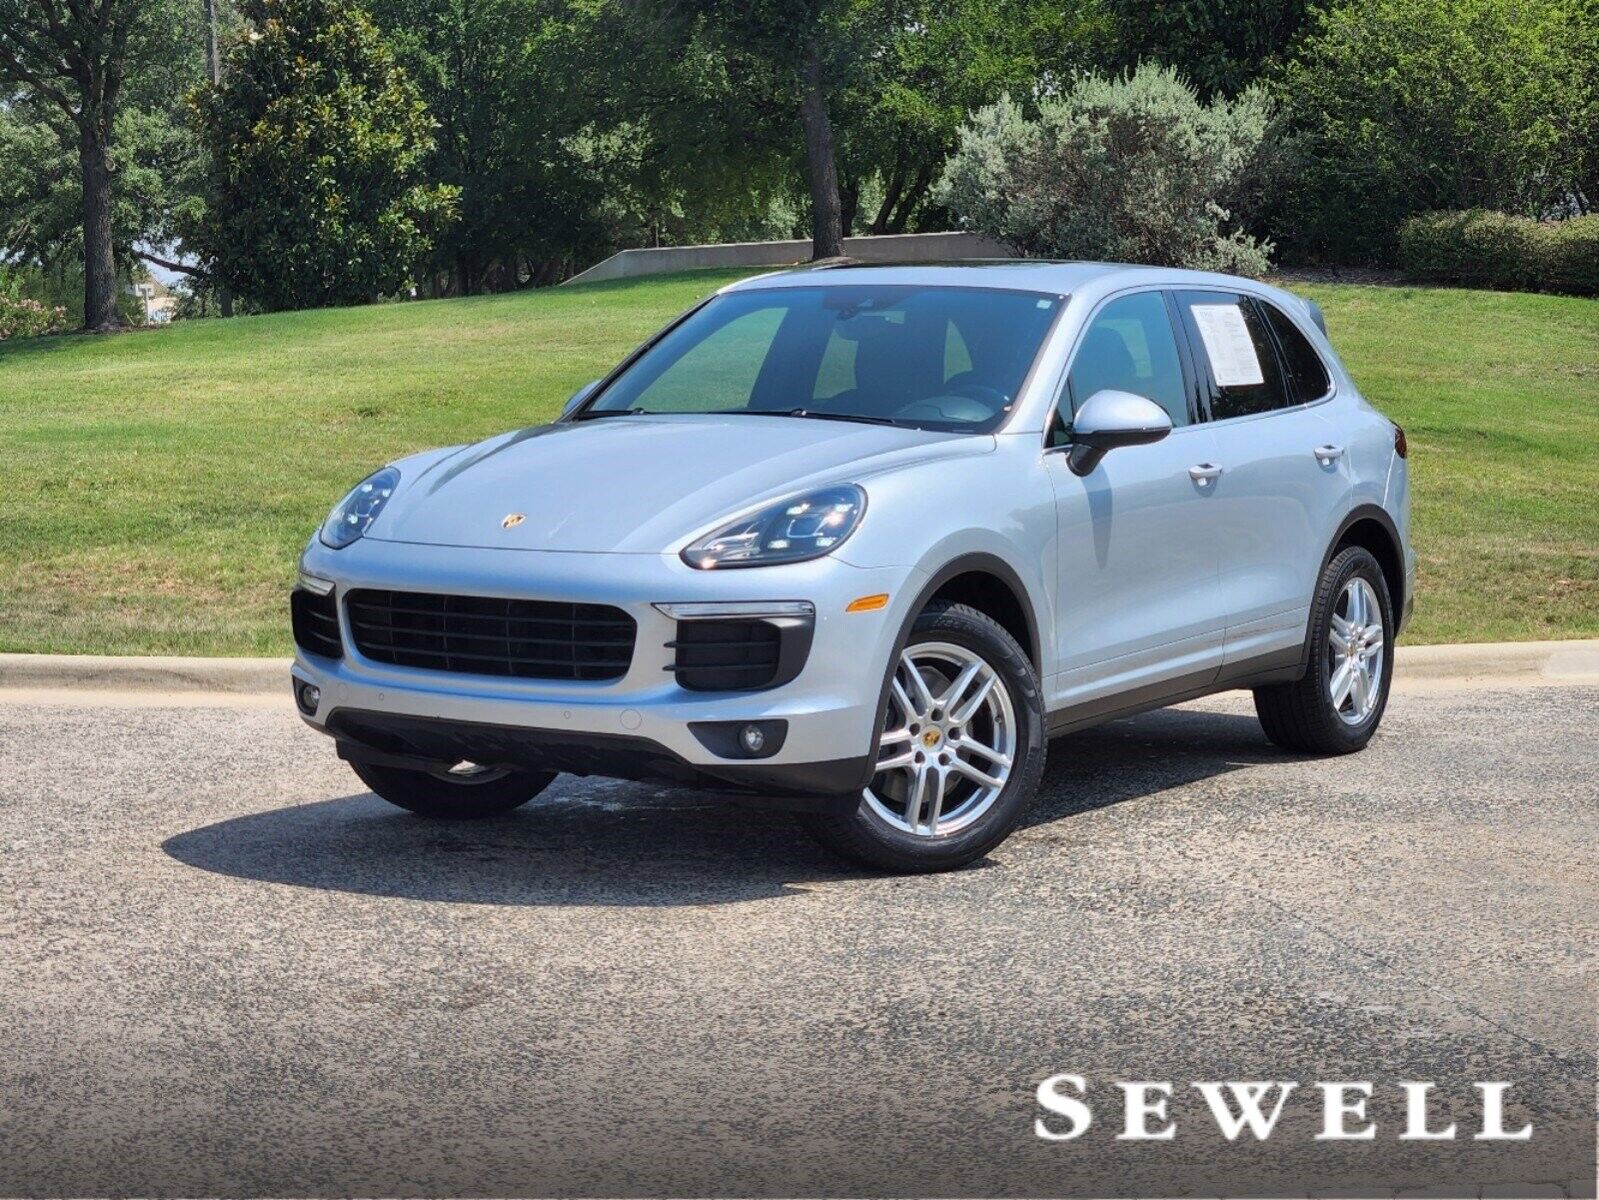 2017 Porsche Cayenne, Rhodium Silver Metallic with 54476 Miles available now!